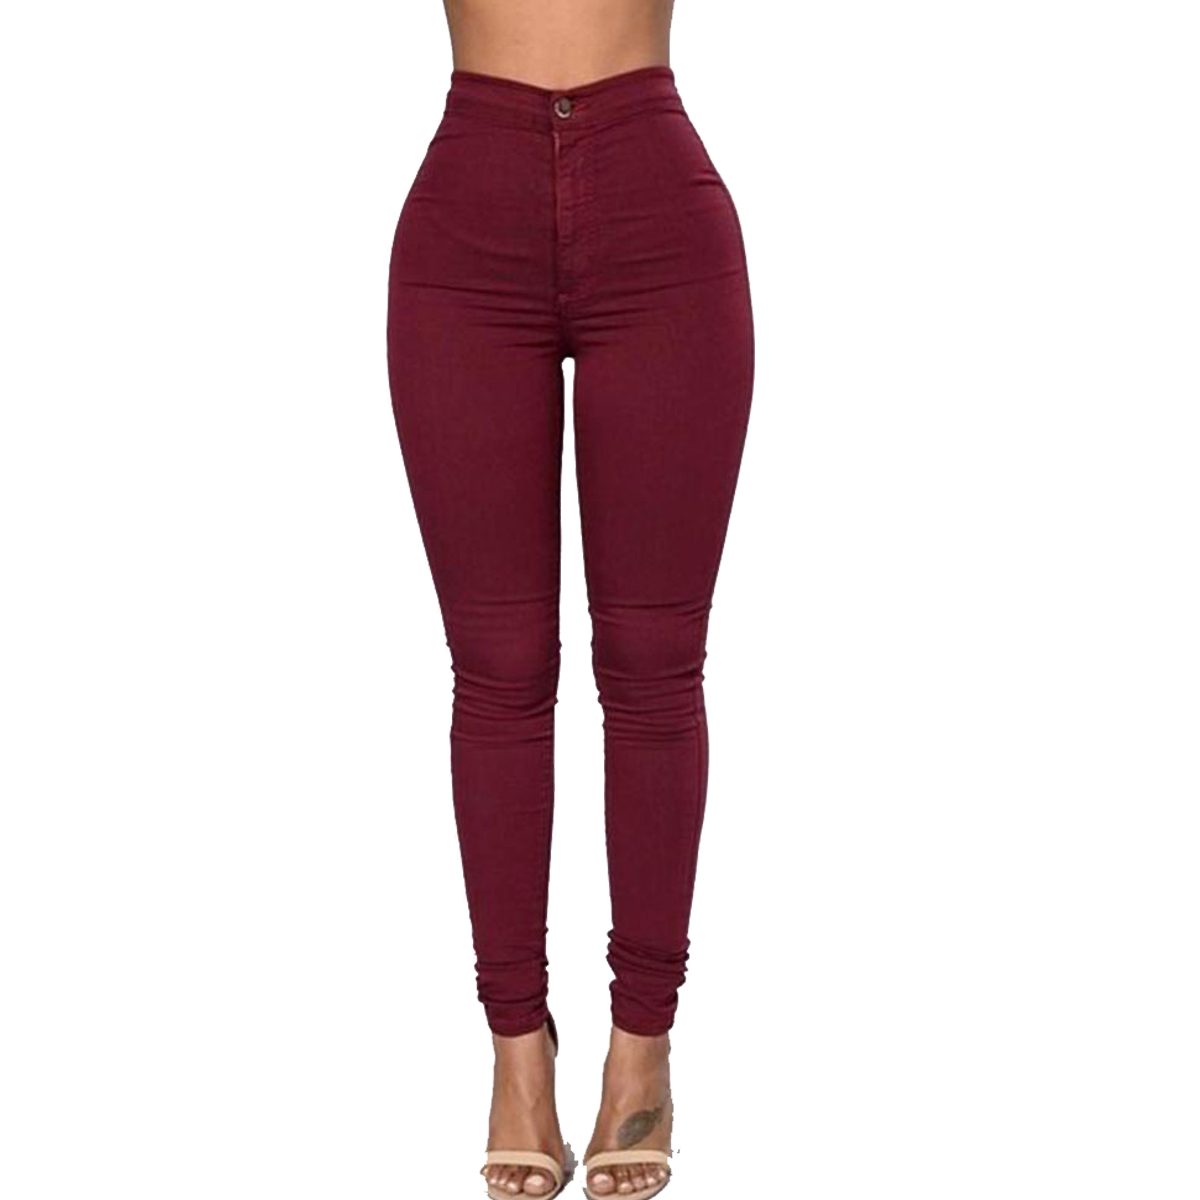 Woman Pencil Stretch Casual Look Denim Skinny Jeans Pants High Waist Trousers - image 1 of 5